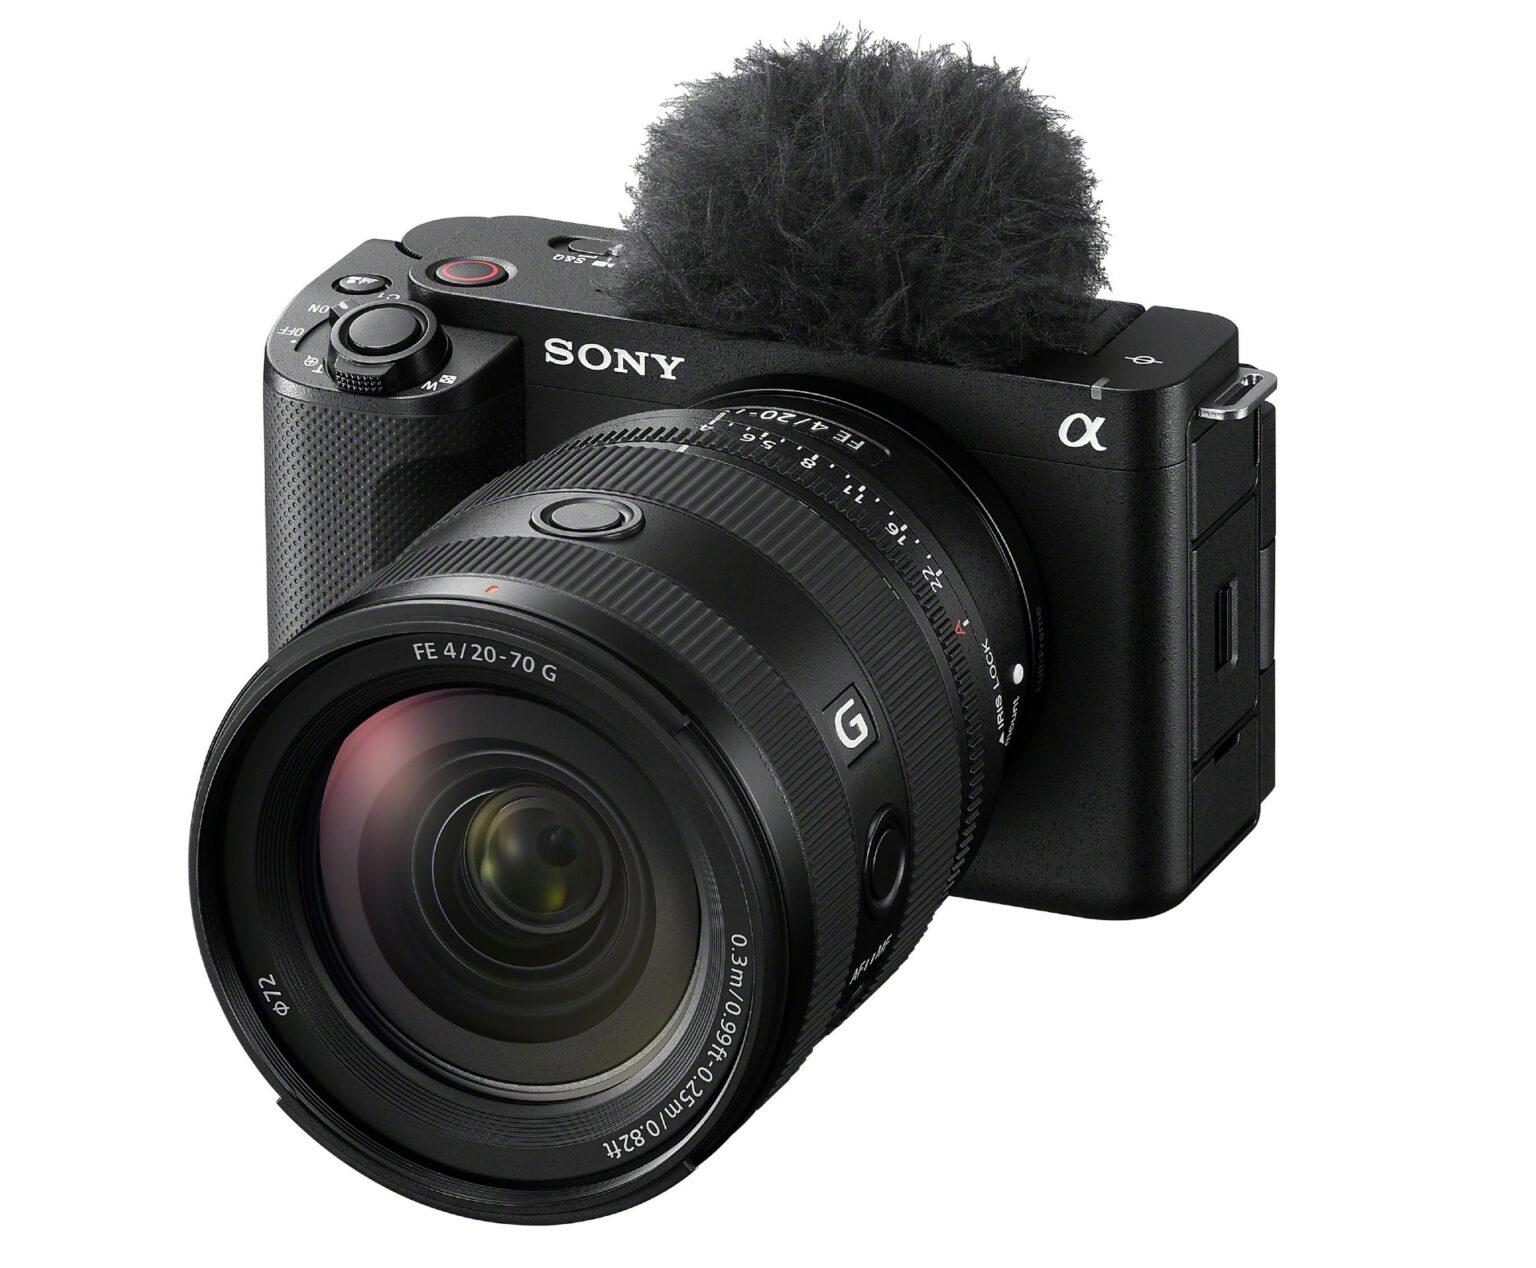 The new Sony ZV-E1 is designed for vloggers and other content creators.